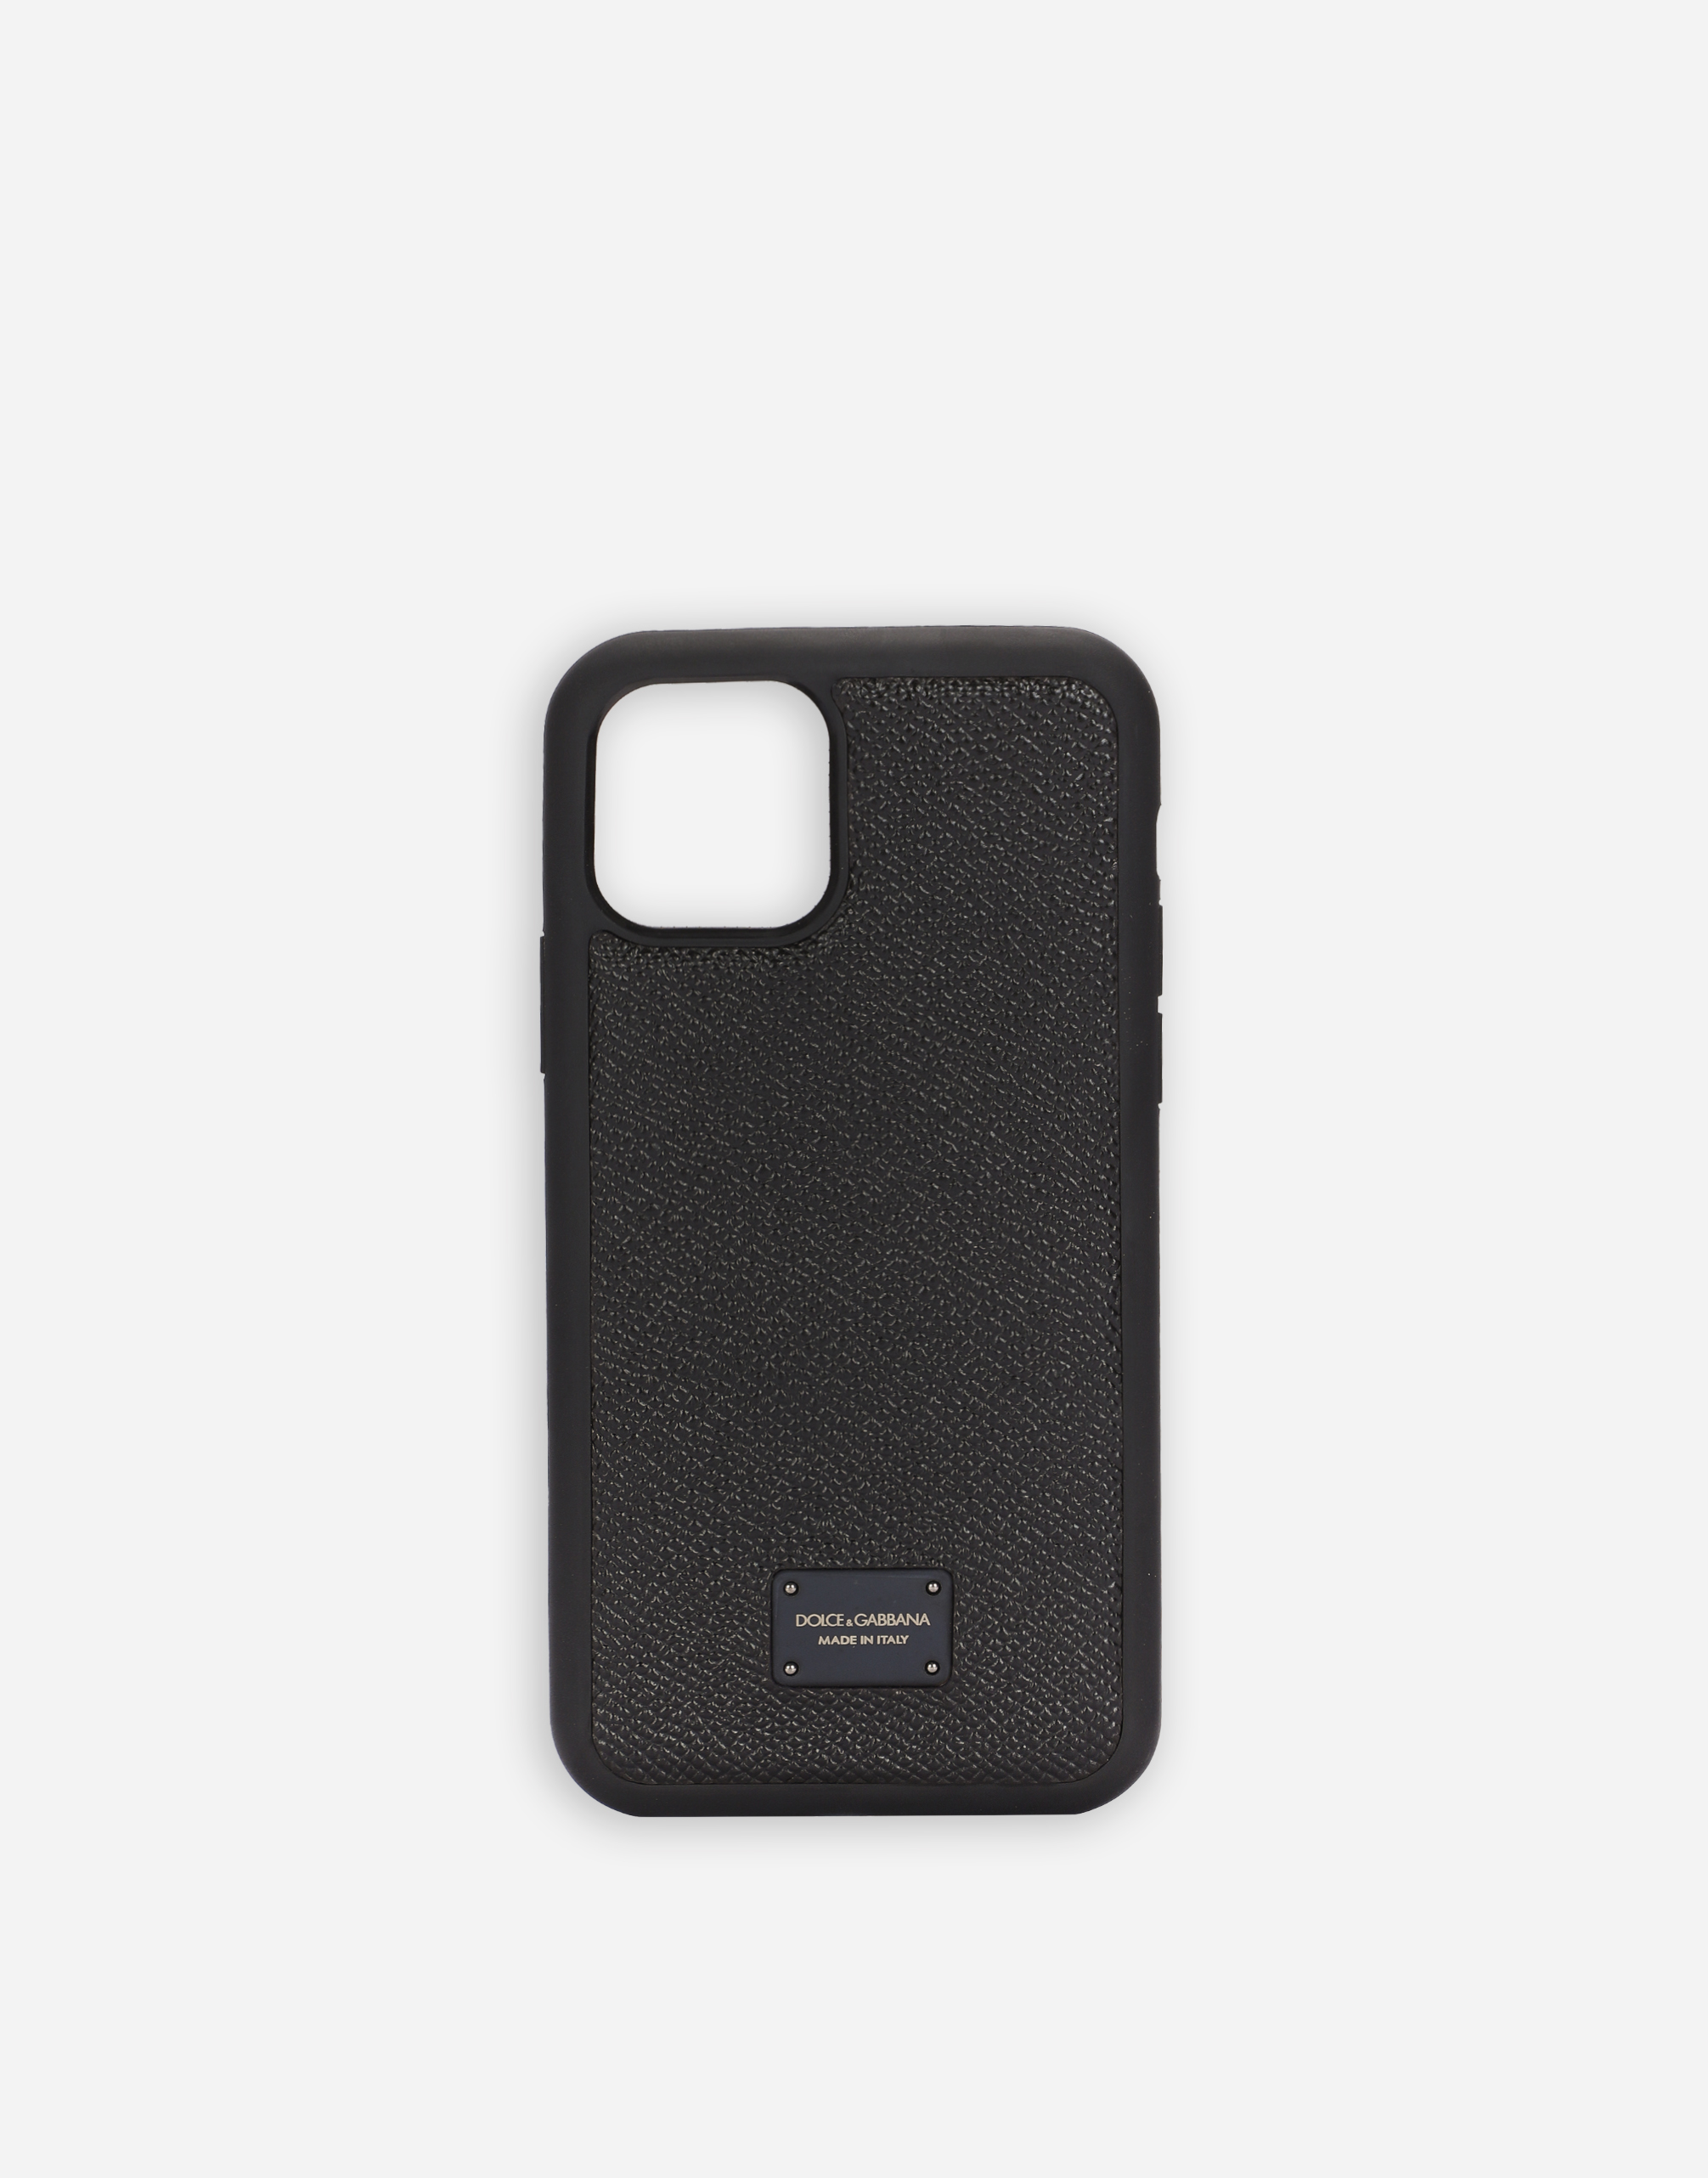 Dauphine calfskin iPhone 11 Pro cover with branded plate in Black